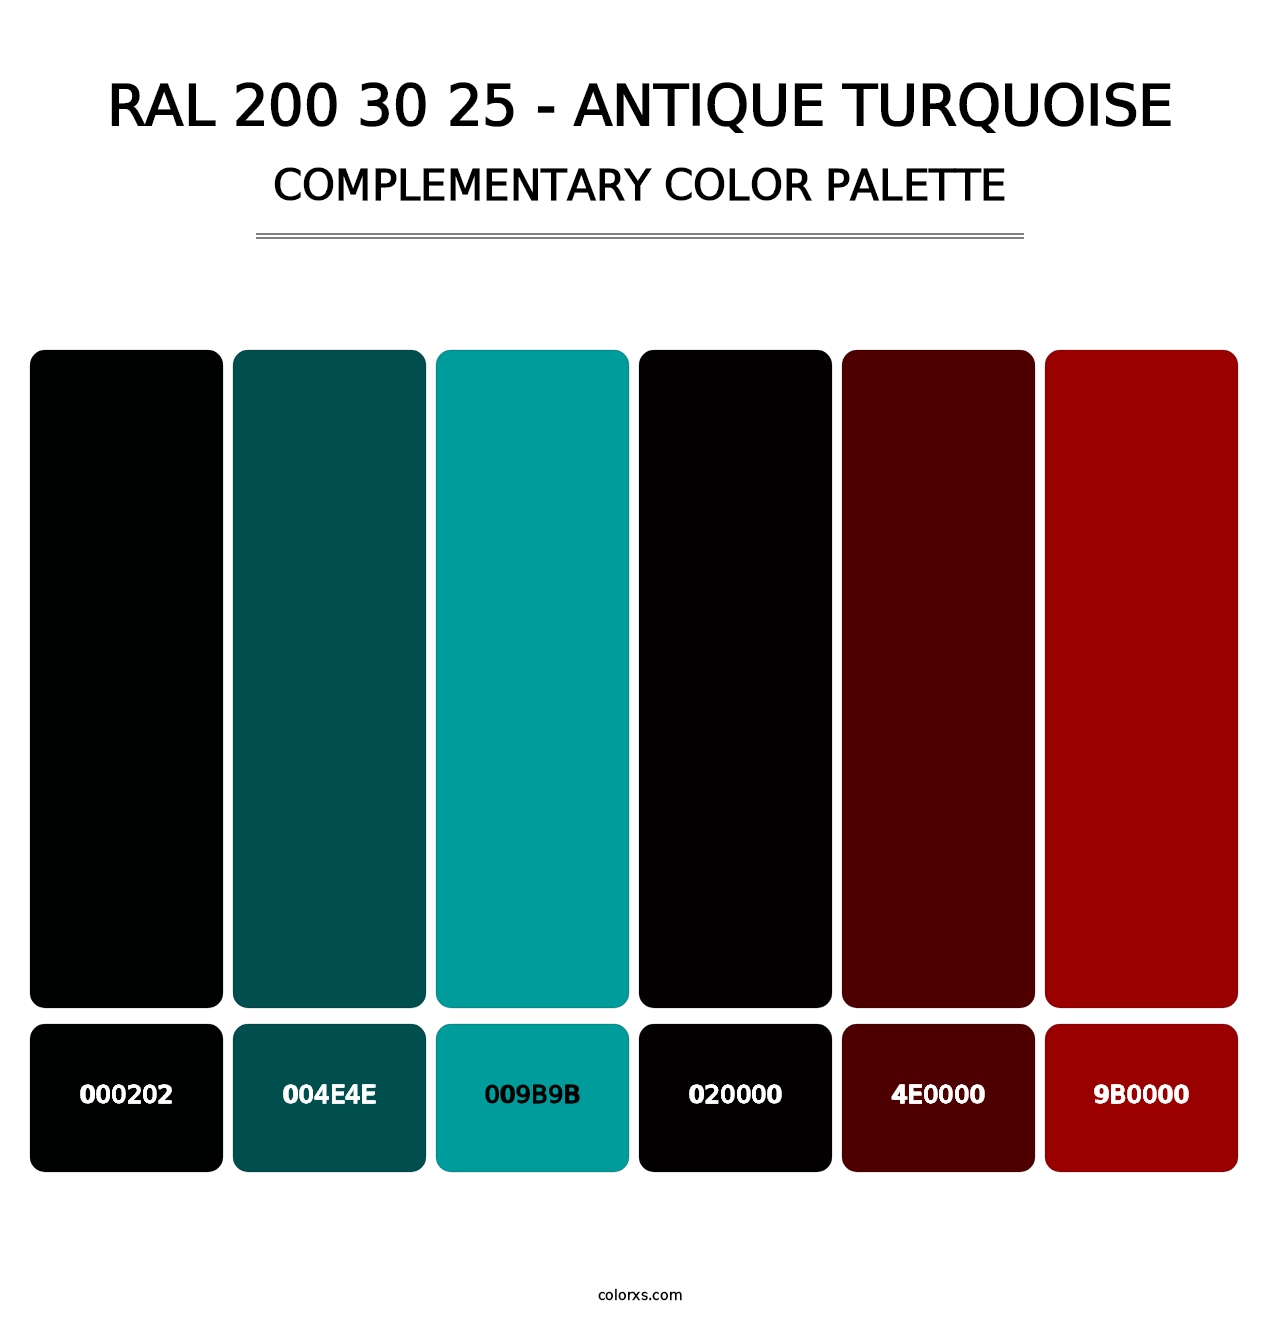 RAL 200 30 25 - Antique Turquoise - Complementary Color Palette